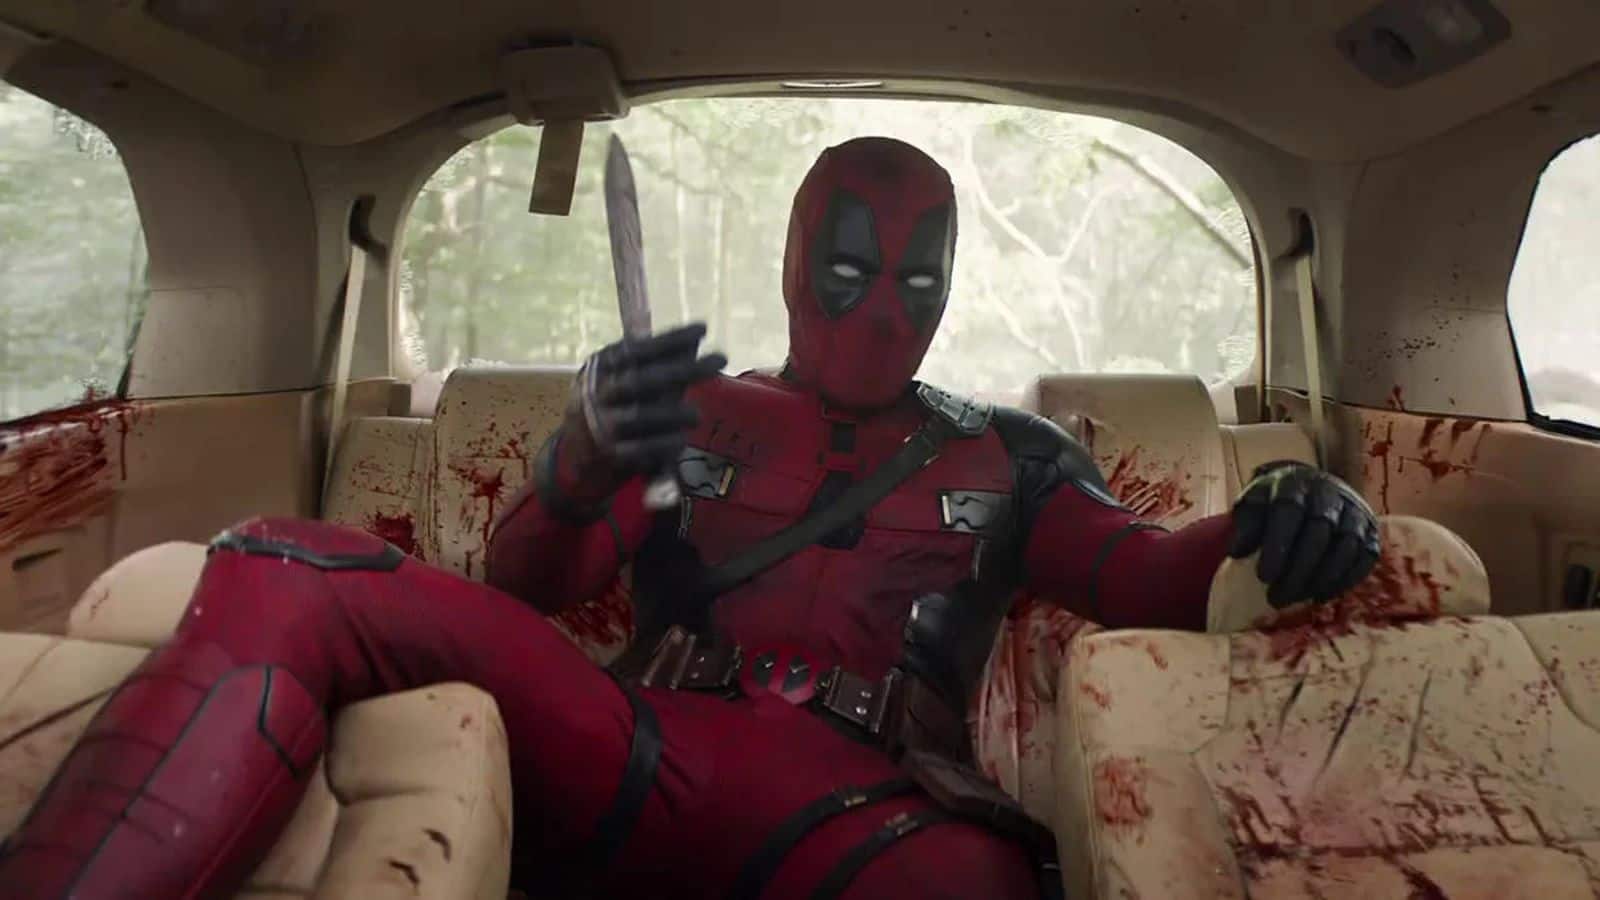 Deadpool and Wolverine's anti-cell phone PSA might play in theaters